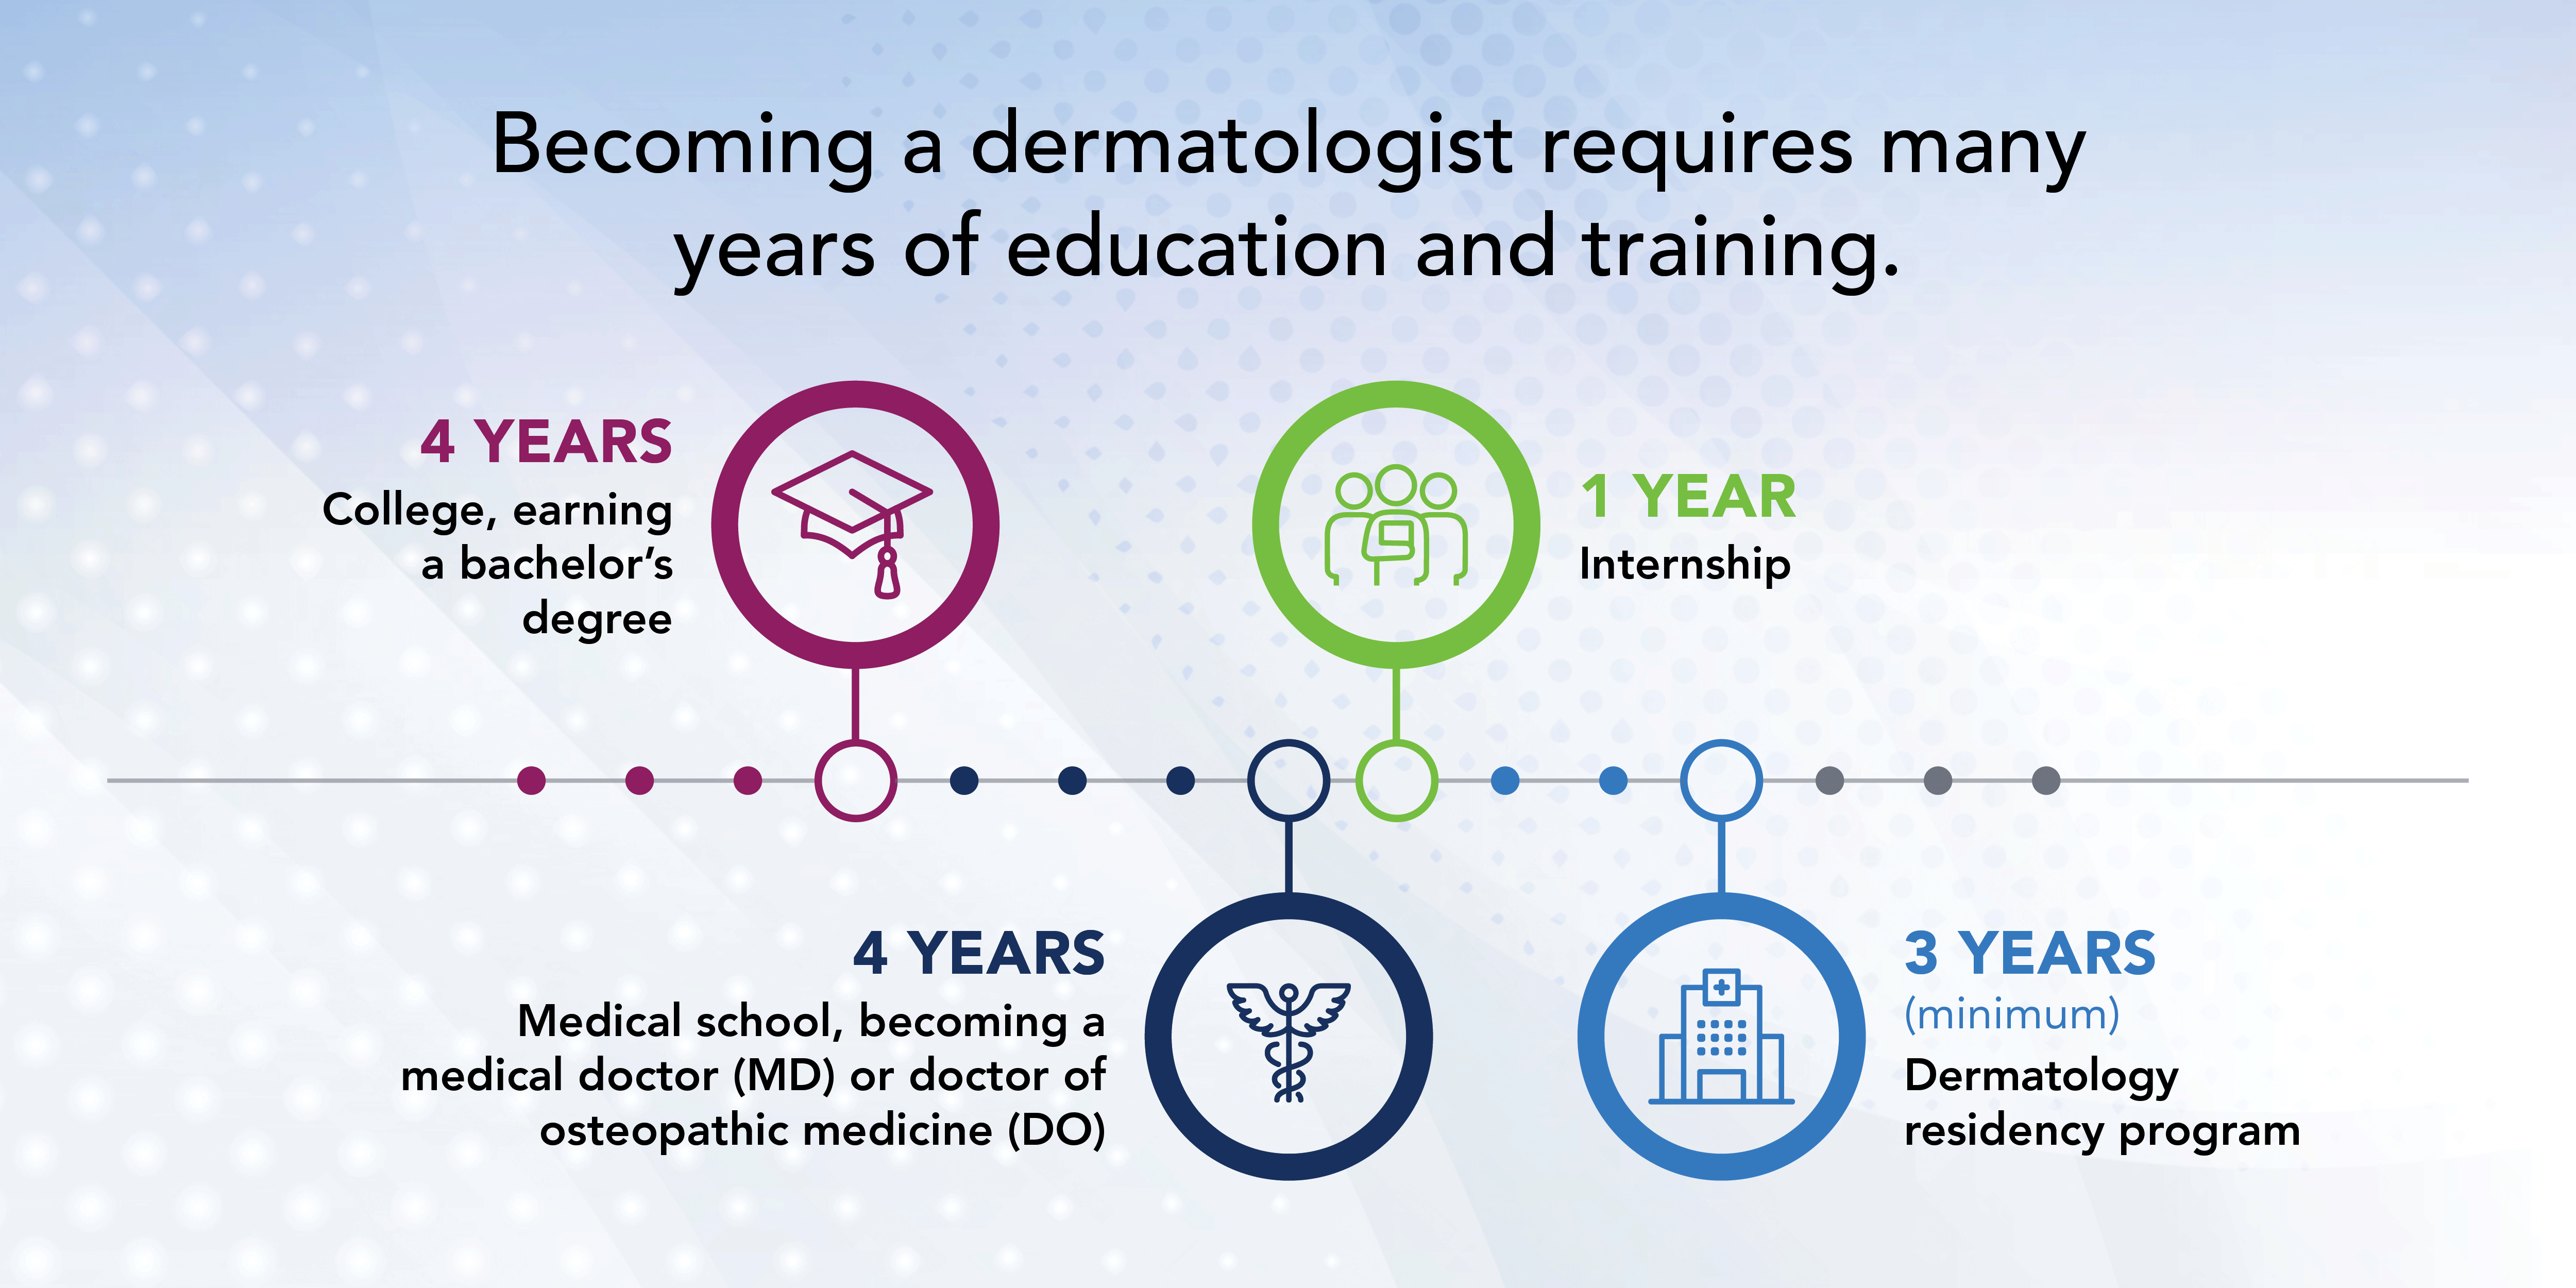 Dermatologist years of education and training infographic.